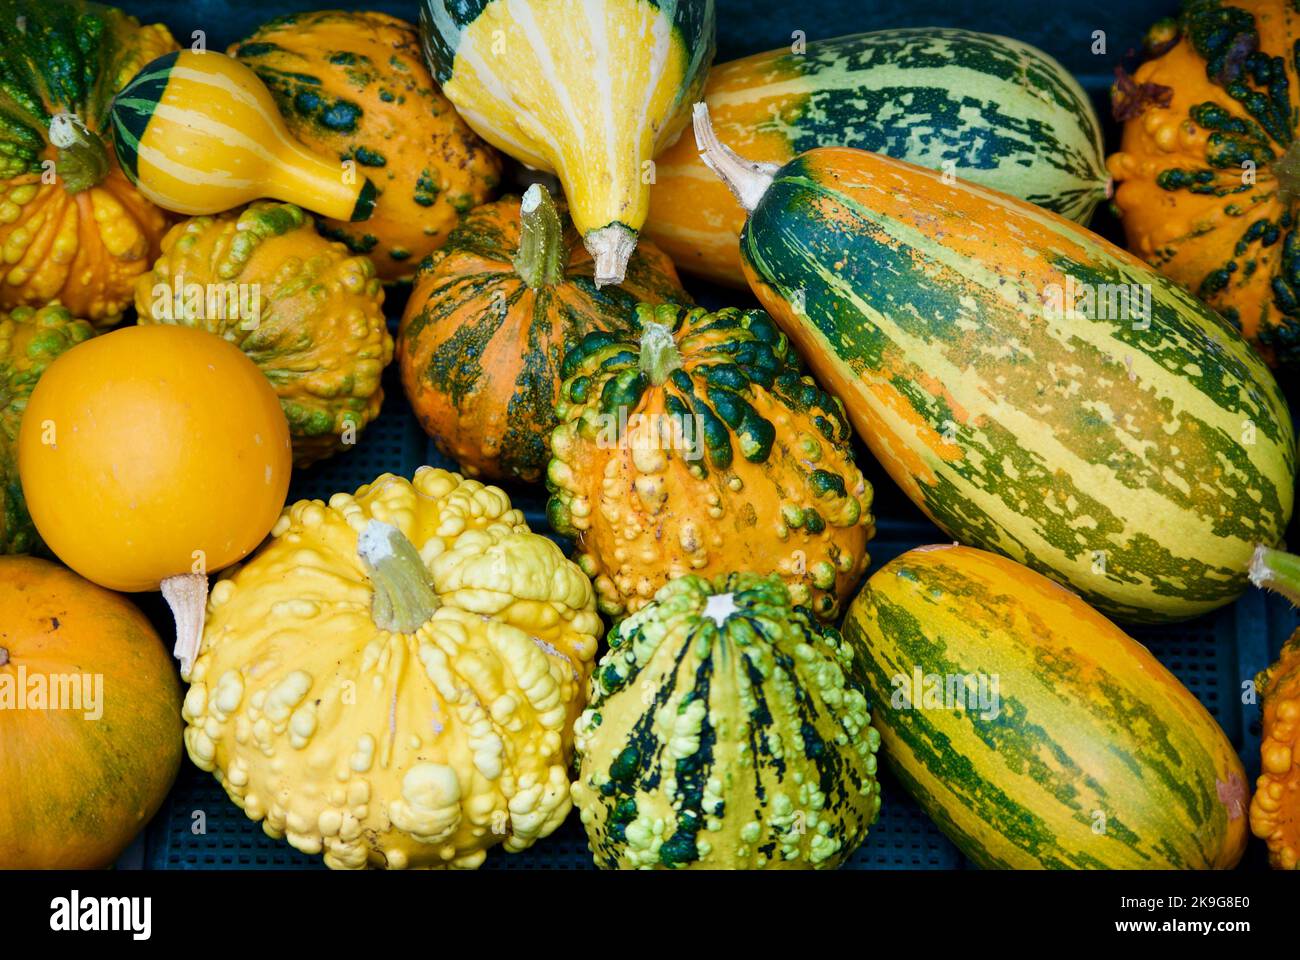 Small decorative and colorful pumpkins for sale on farmers market in autumn. Stock Photo